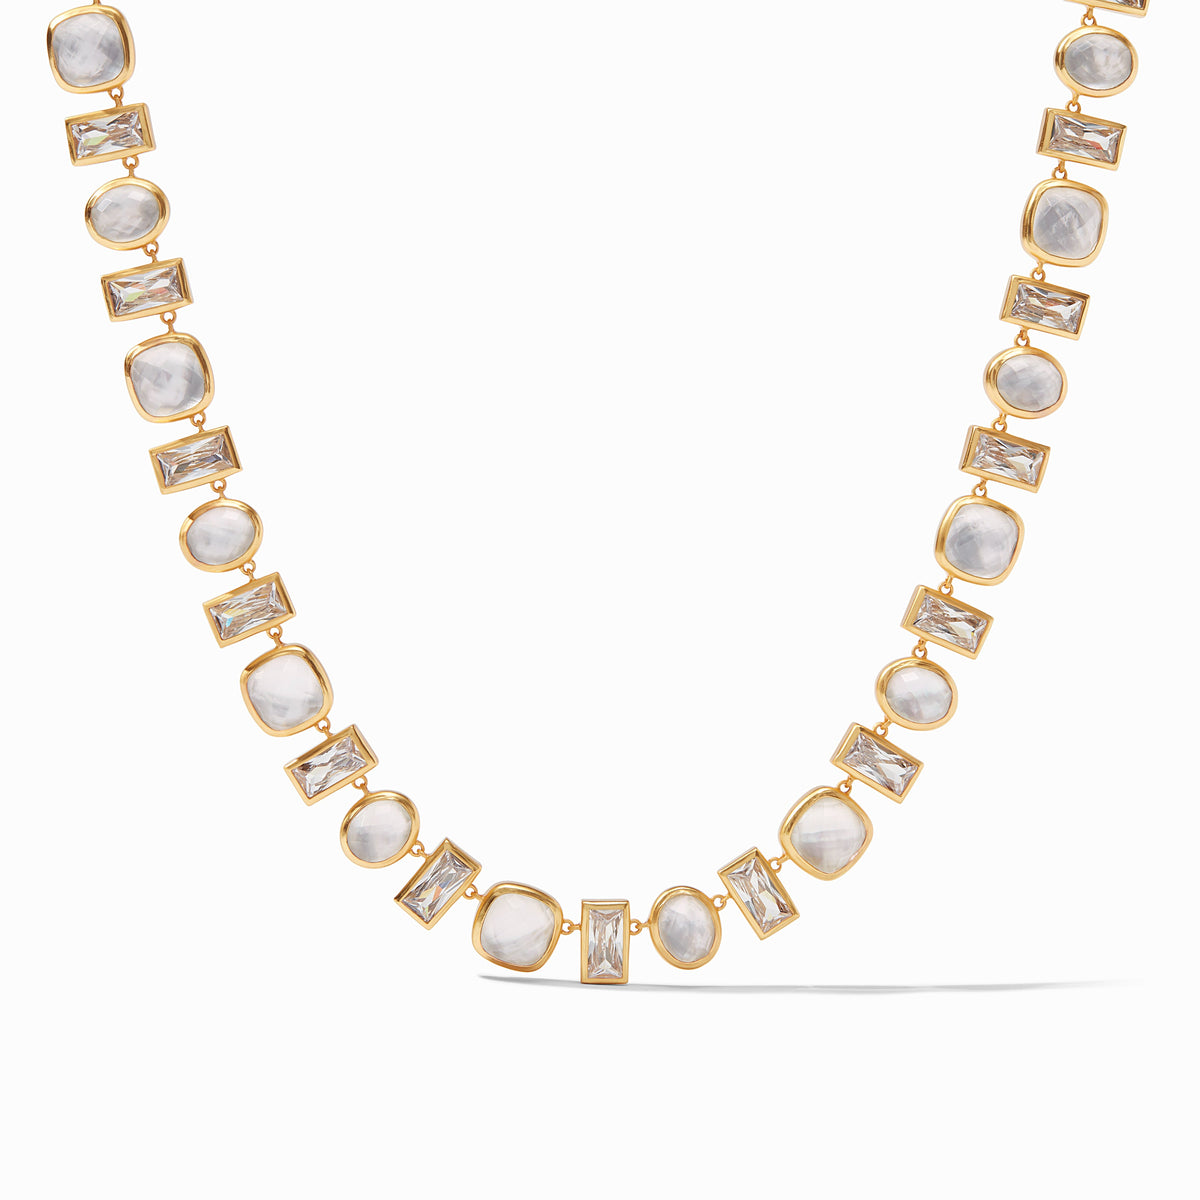 Julie Vos - Antonia Tennis Necklace, Iridescent Clear Crystal